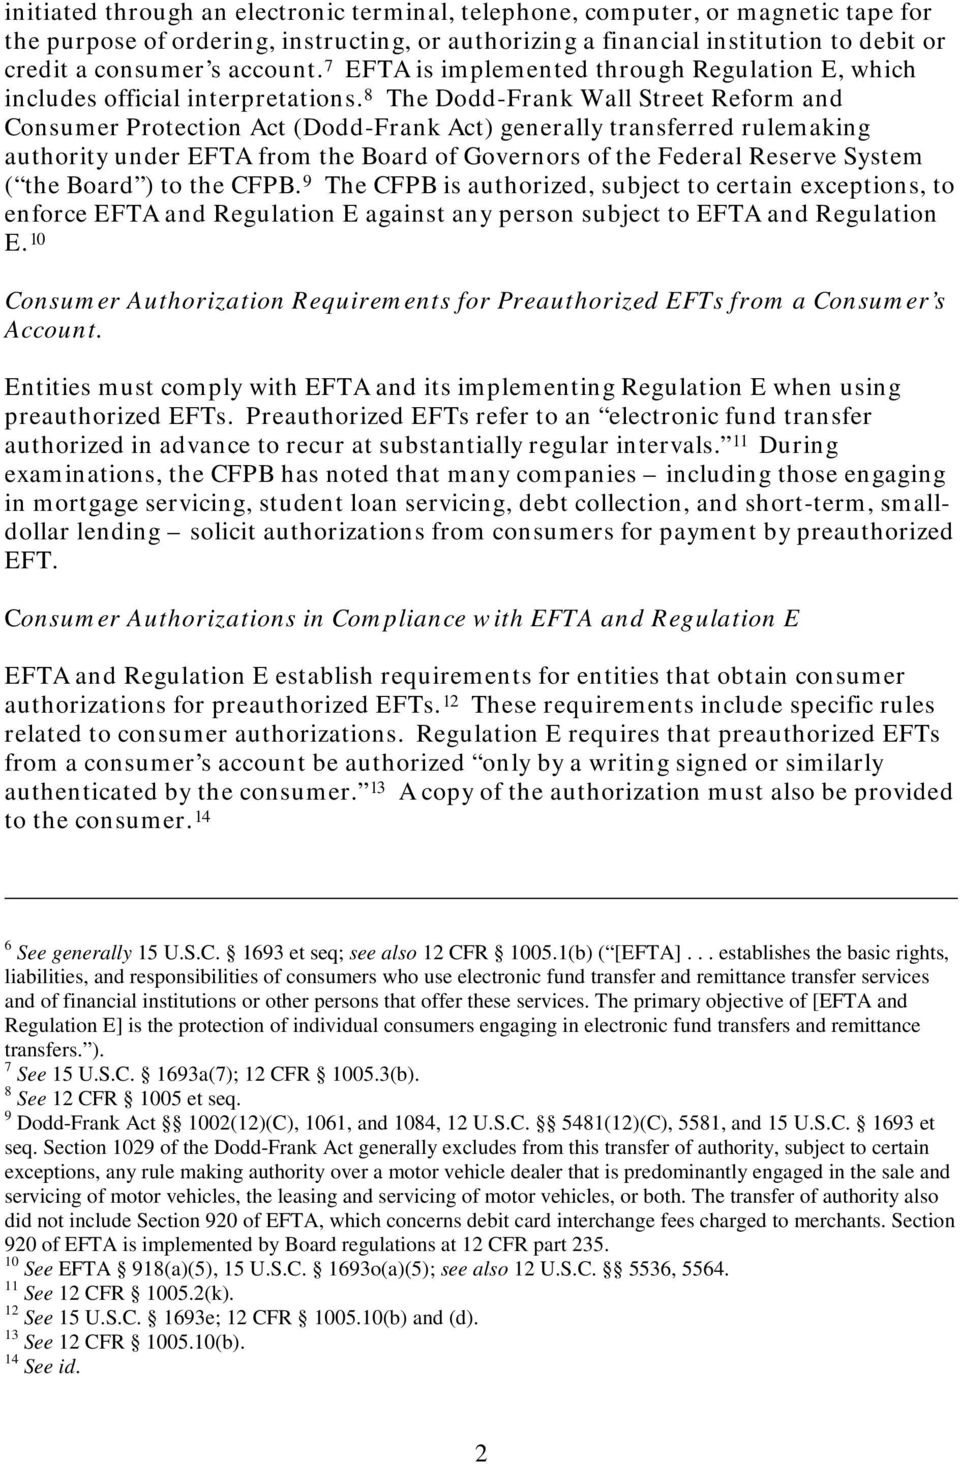 8 The Dodd-Frank Wall Street Reform and Consumer Protection Act (Dodd-Frank Act) generally transferred rulemaking authority under EFTA from the Board of Governors of the Federal Reserve System ( the